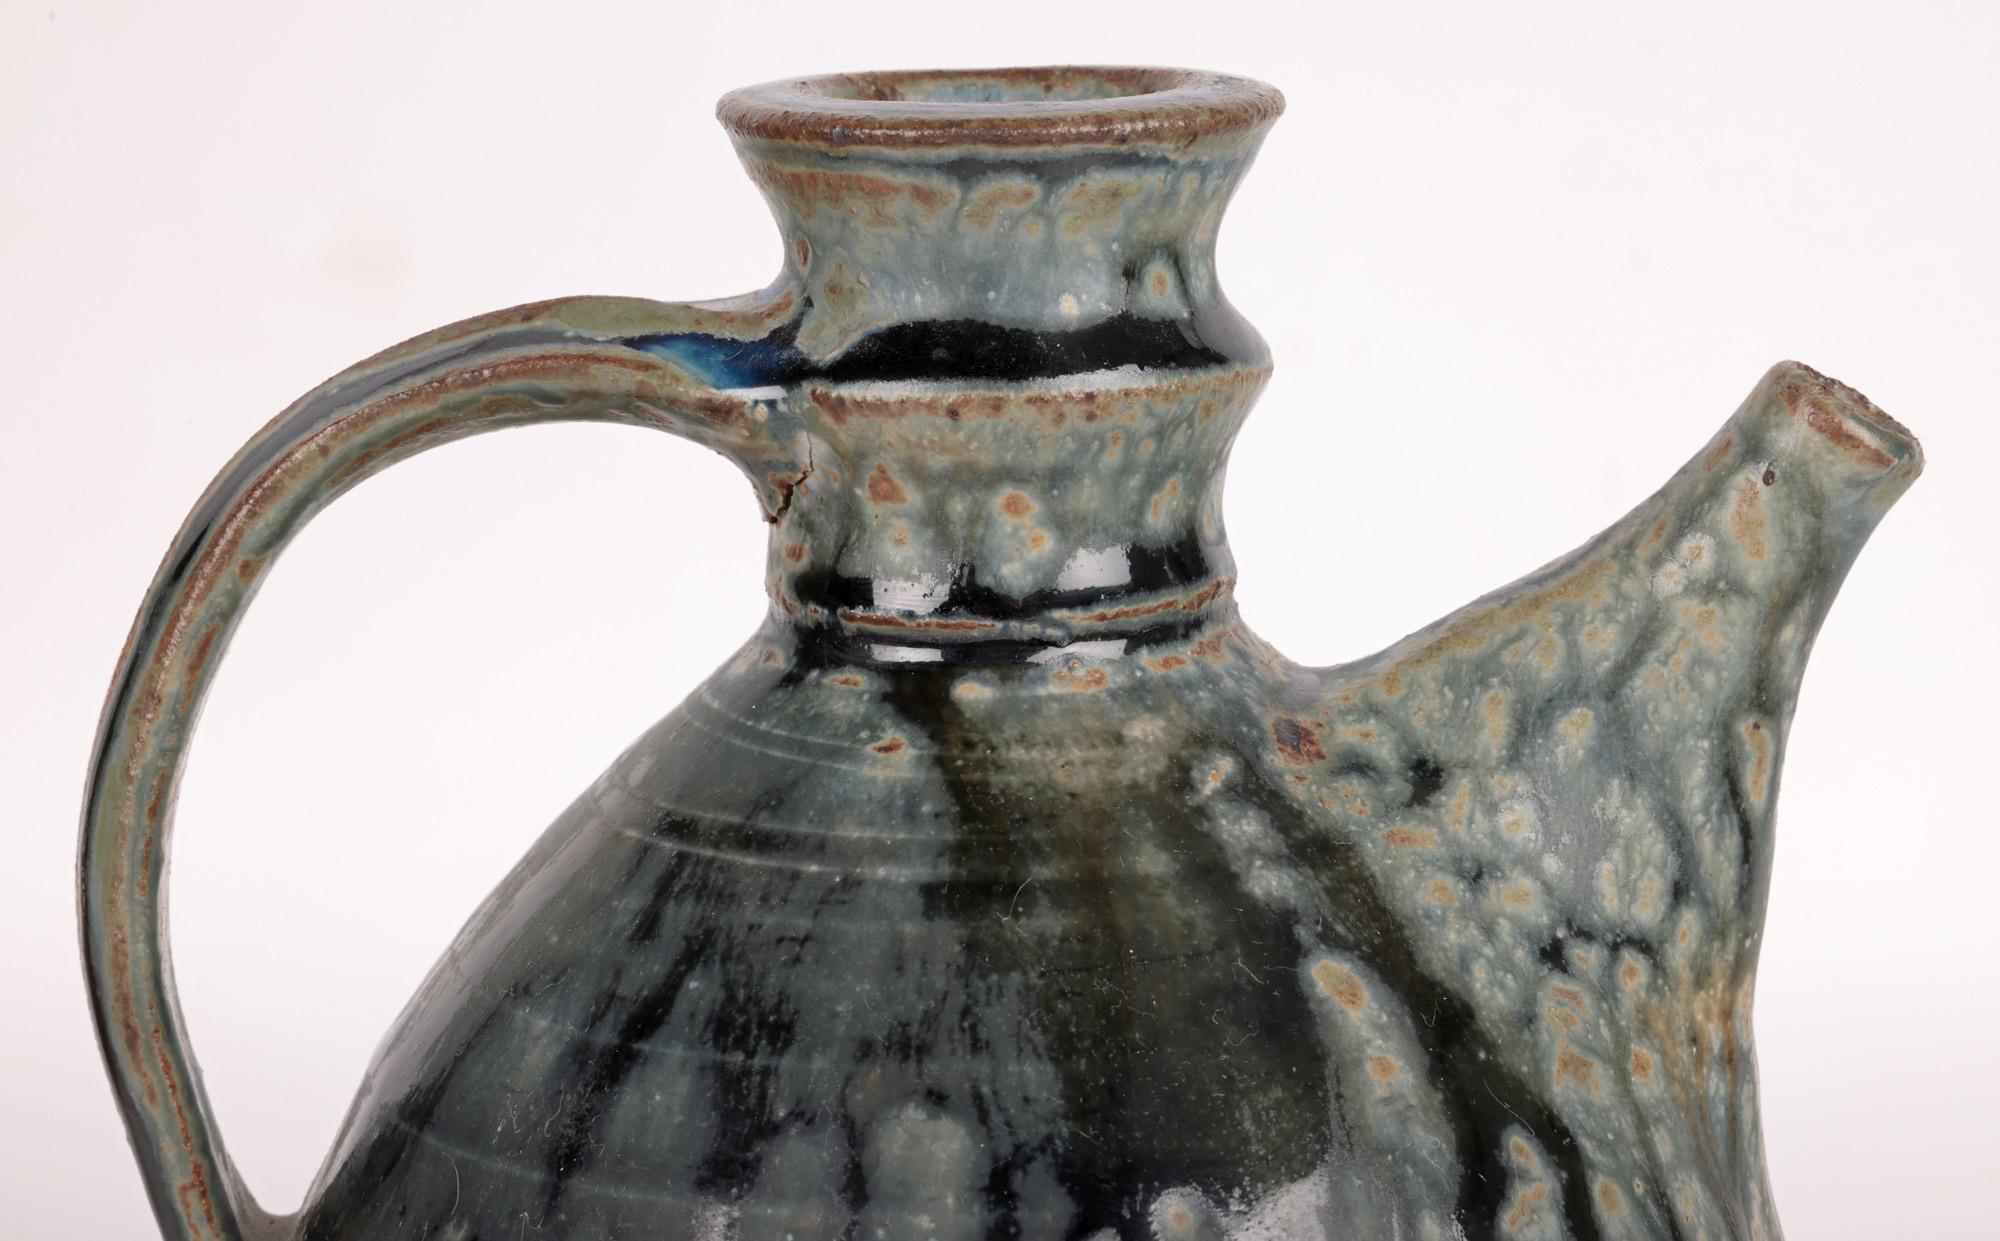 An exceptional and stunning British salt glazed studio pottery flagon decorated in blue streaked glazes dating from the 20th century. This hand thrown stoneware flagon is of tall bulbous shape standing on a flat unglazed base and lower body with a